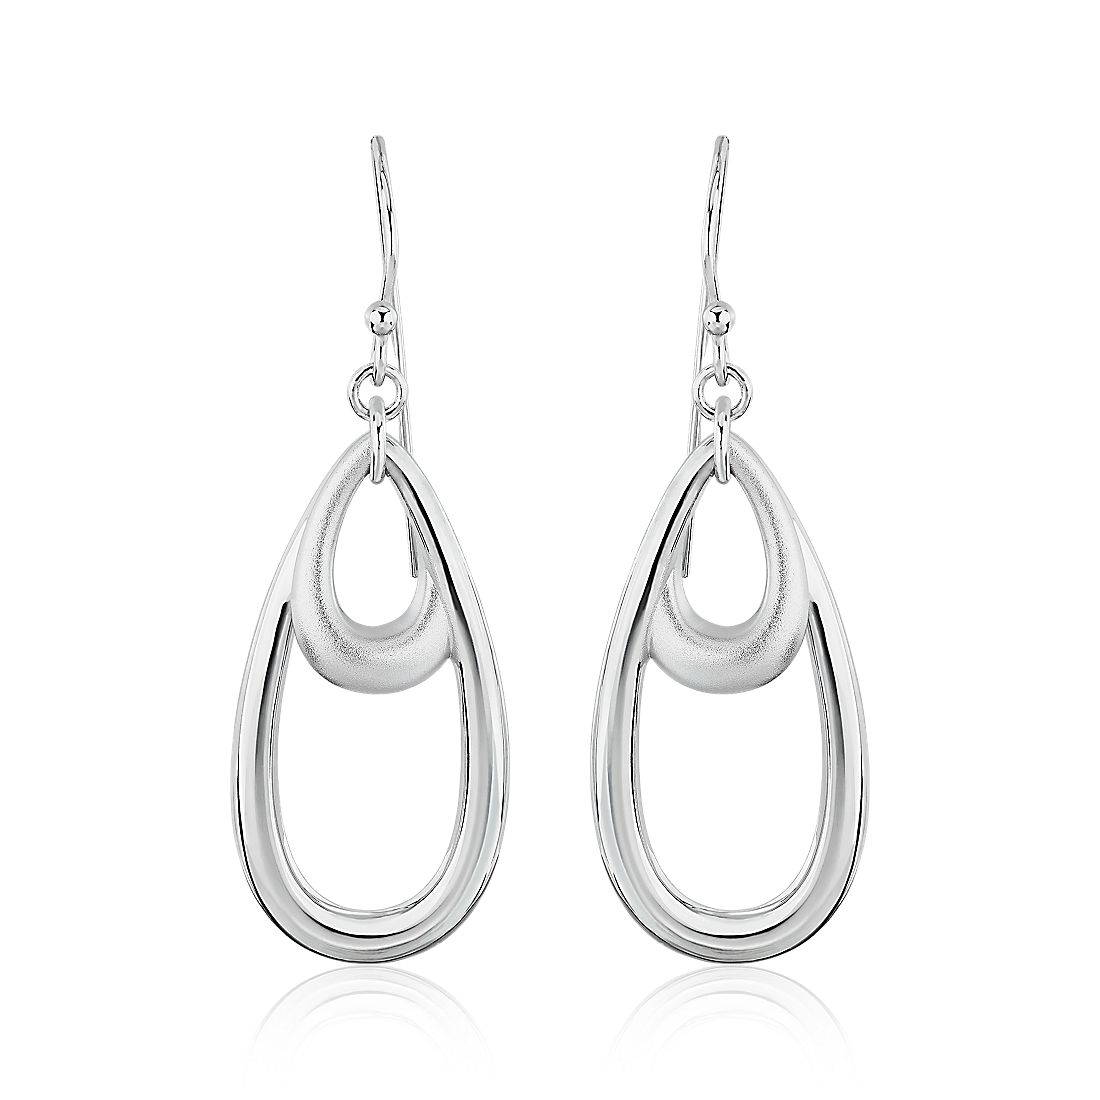 Perfect Jewelry Gift Sterling Silver Rhodium-plated Satin Finish Post Earrings 